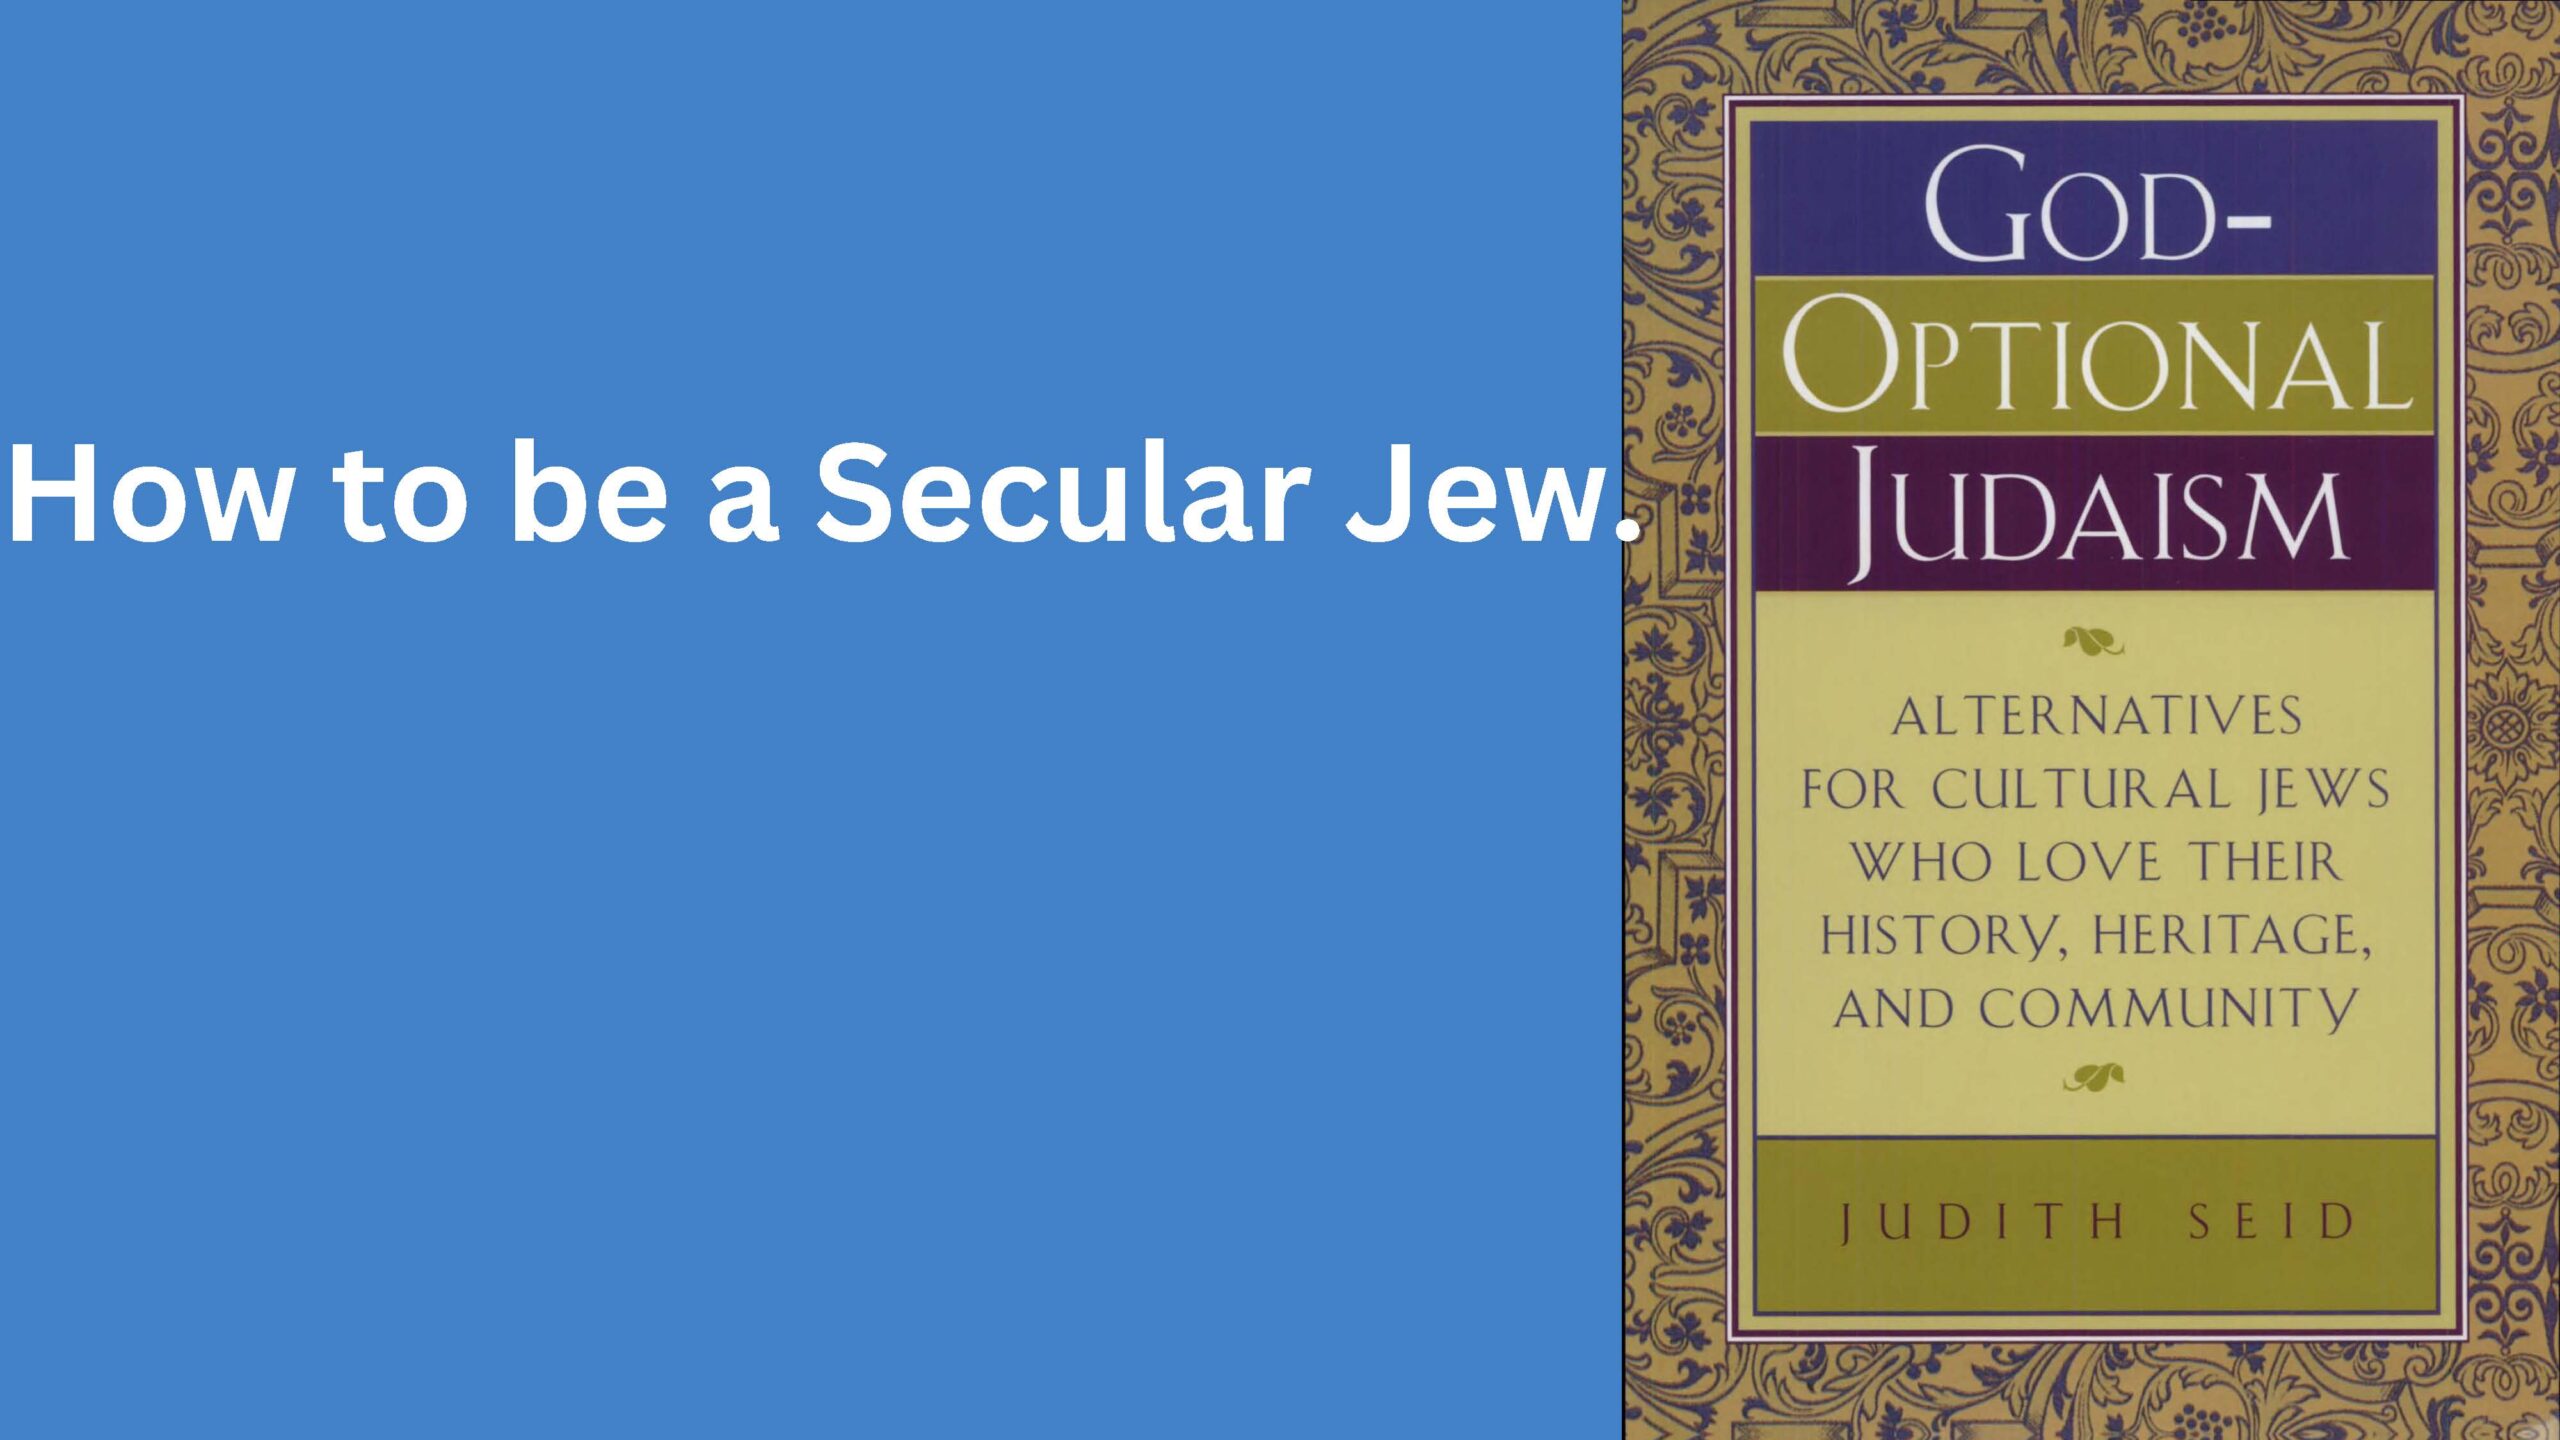 Book How to be a Secular Jew.